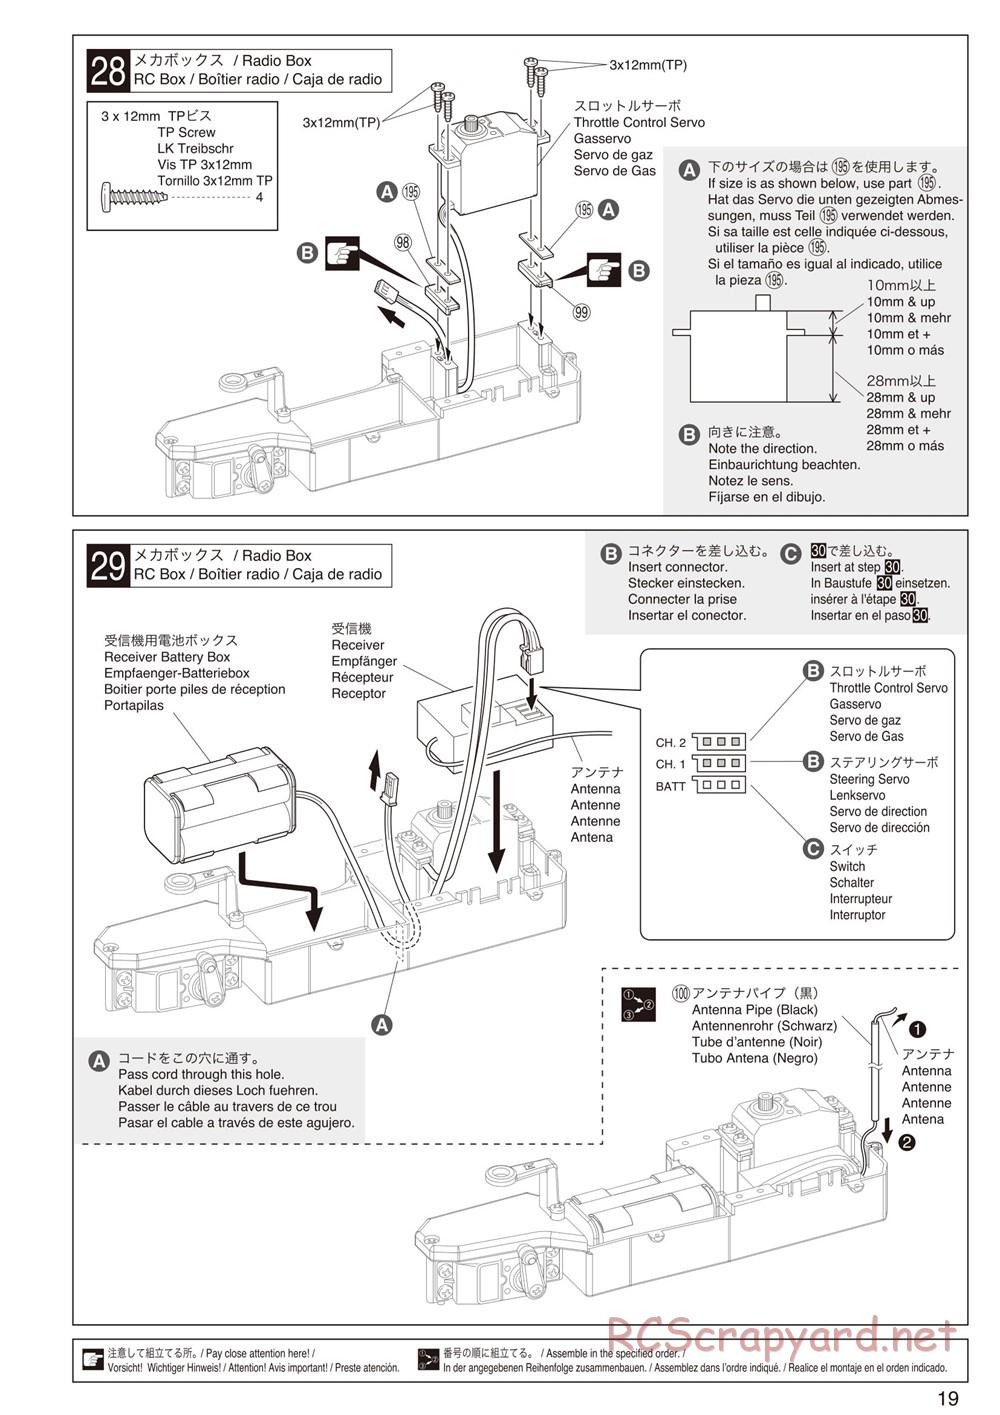 Kyosho - DRX - Manual - Page 19